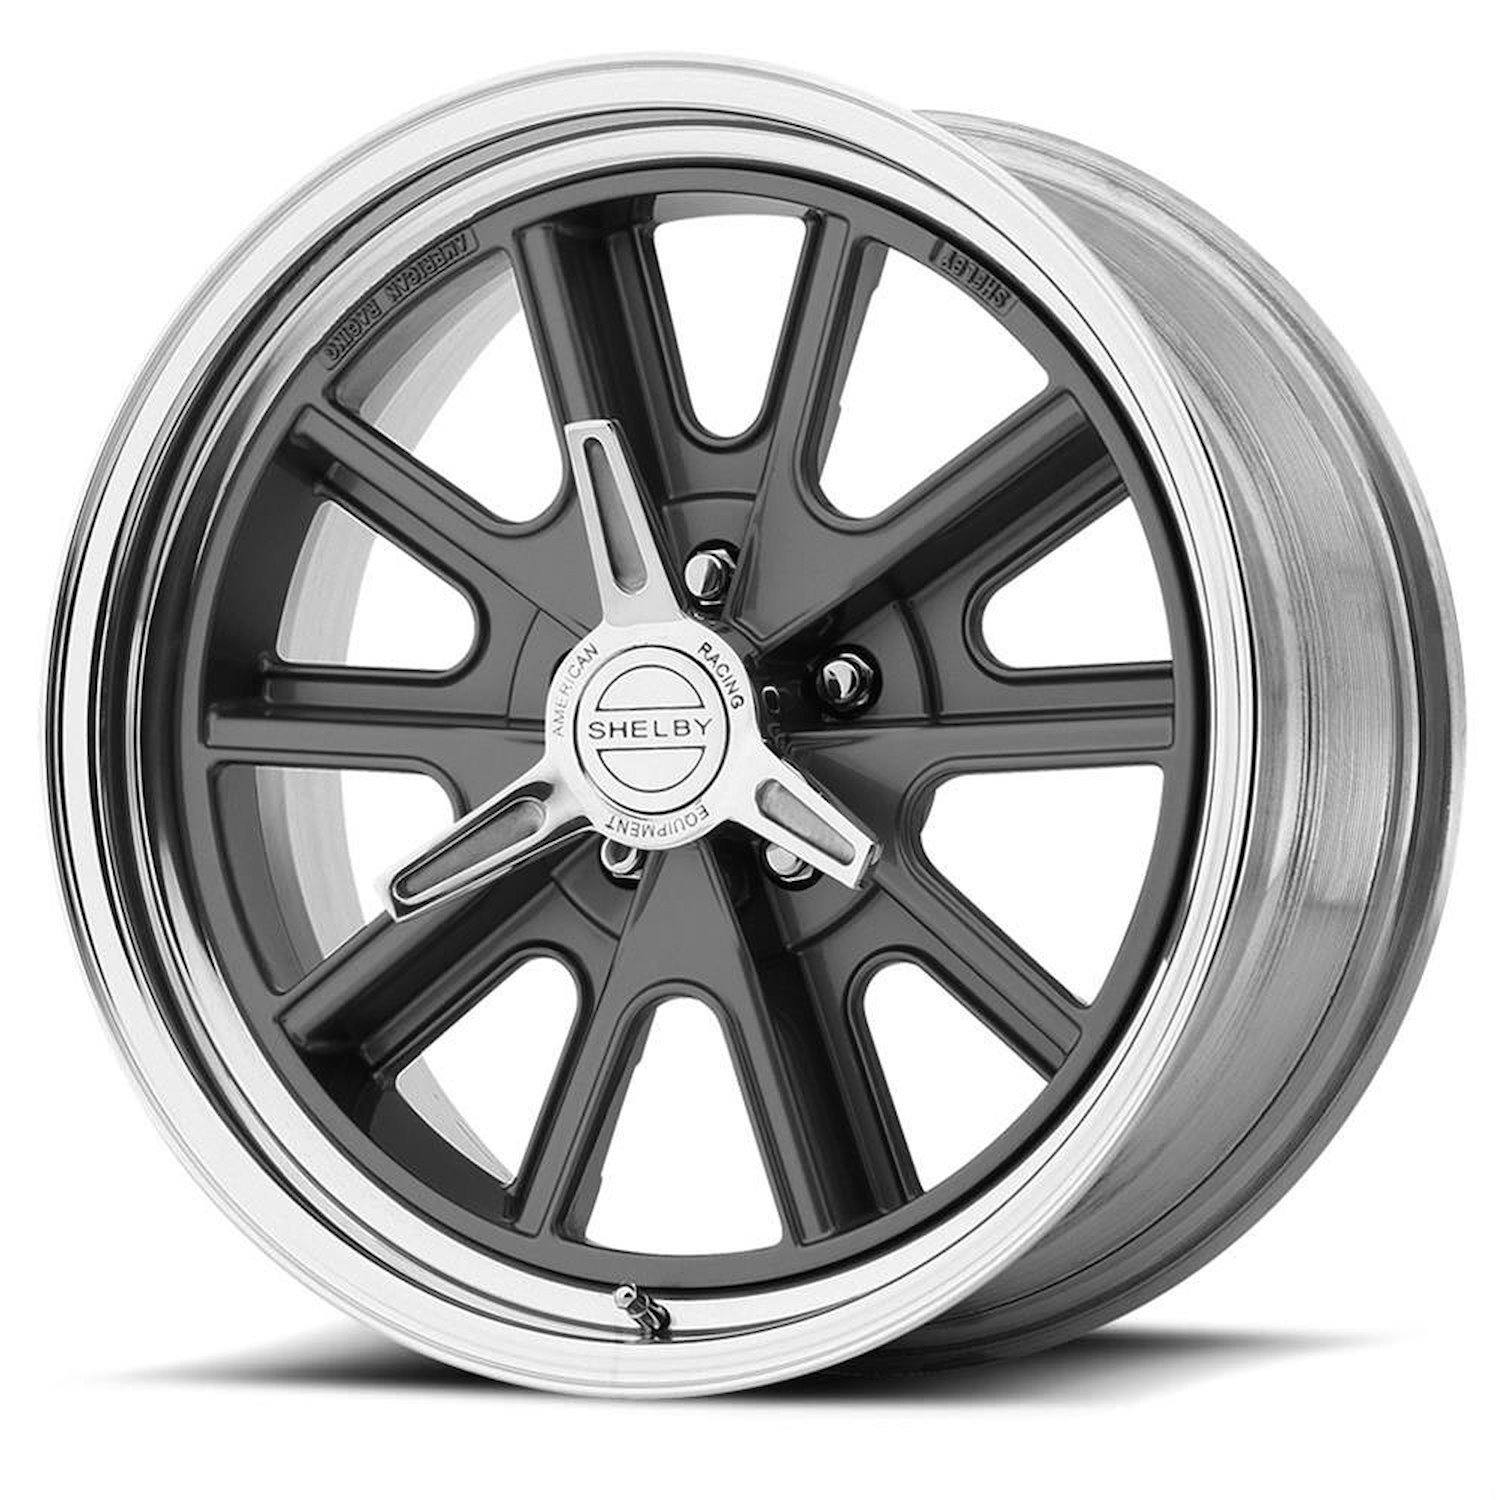 427SC Shelby Cobra Two-Piece Wheel Size: 17 x 9.5", Bolt Pattern: 5x4.5", Offset: -32 mm [Mag Gray w/ Center Polished]